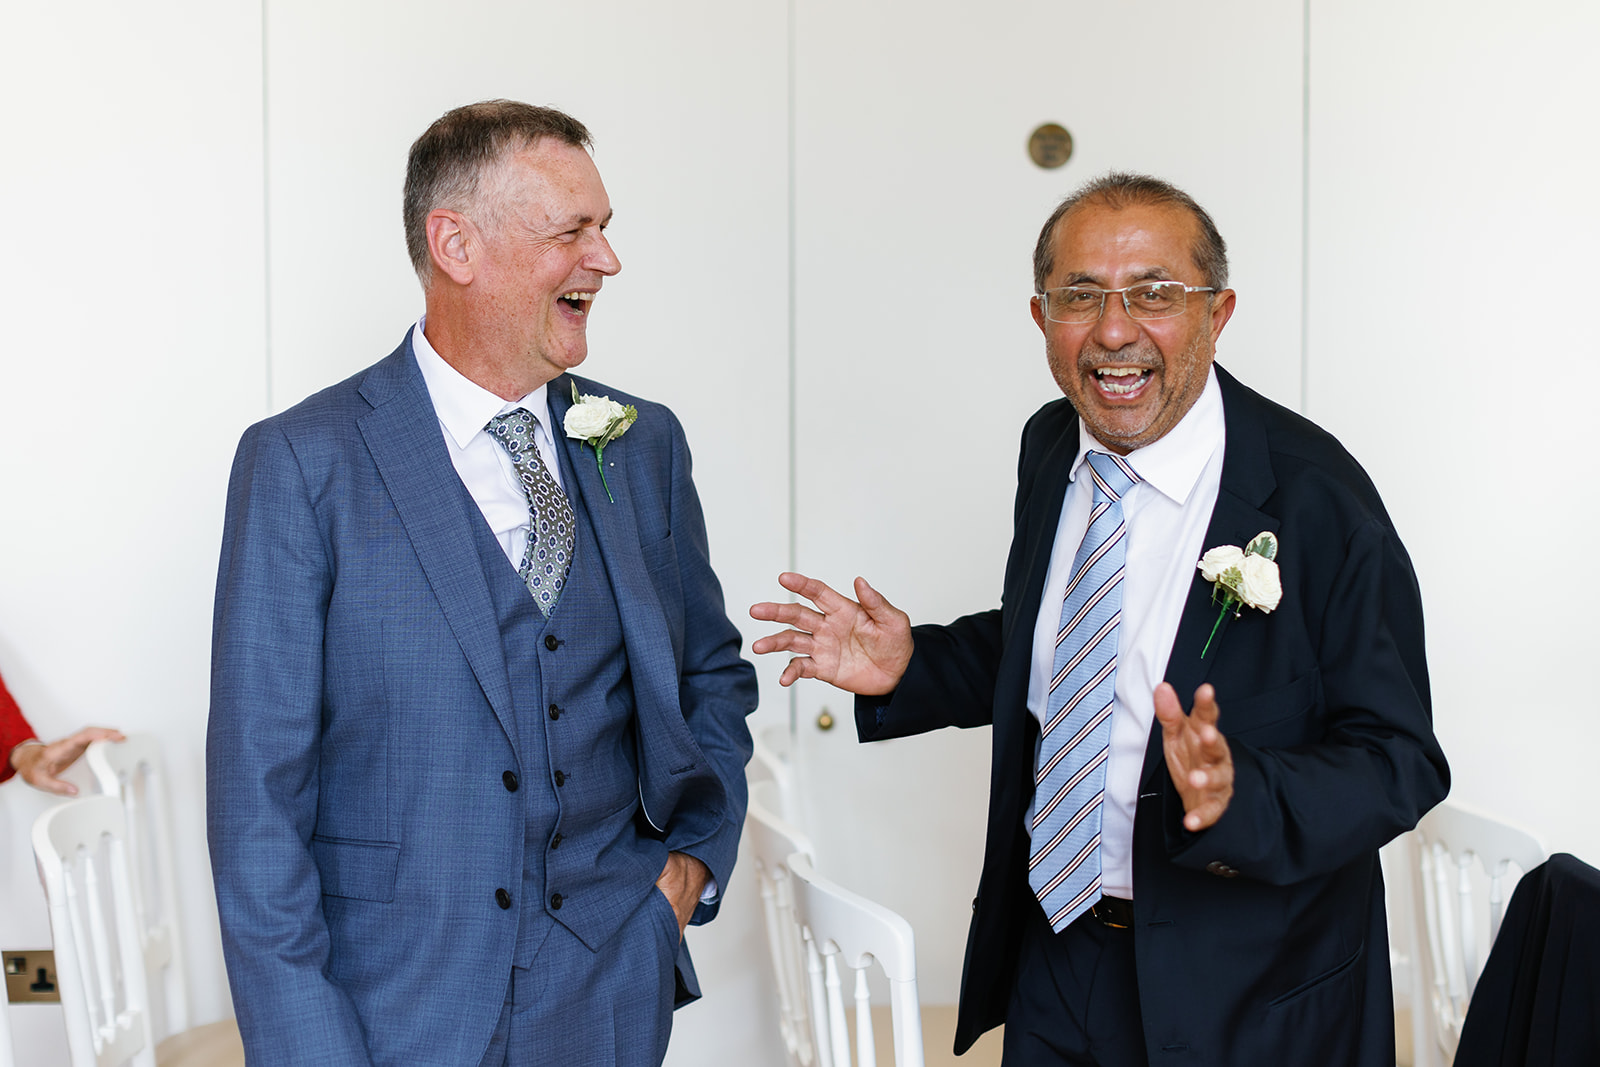 bride and groom fathers laughing